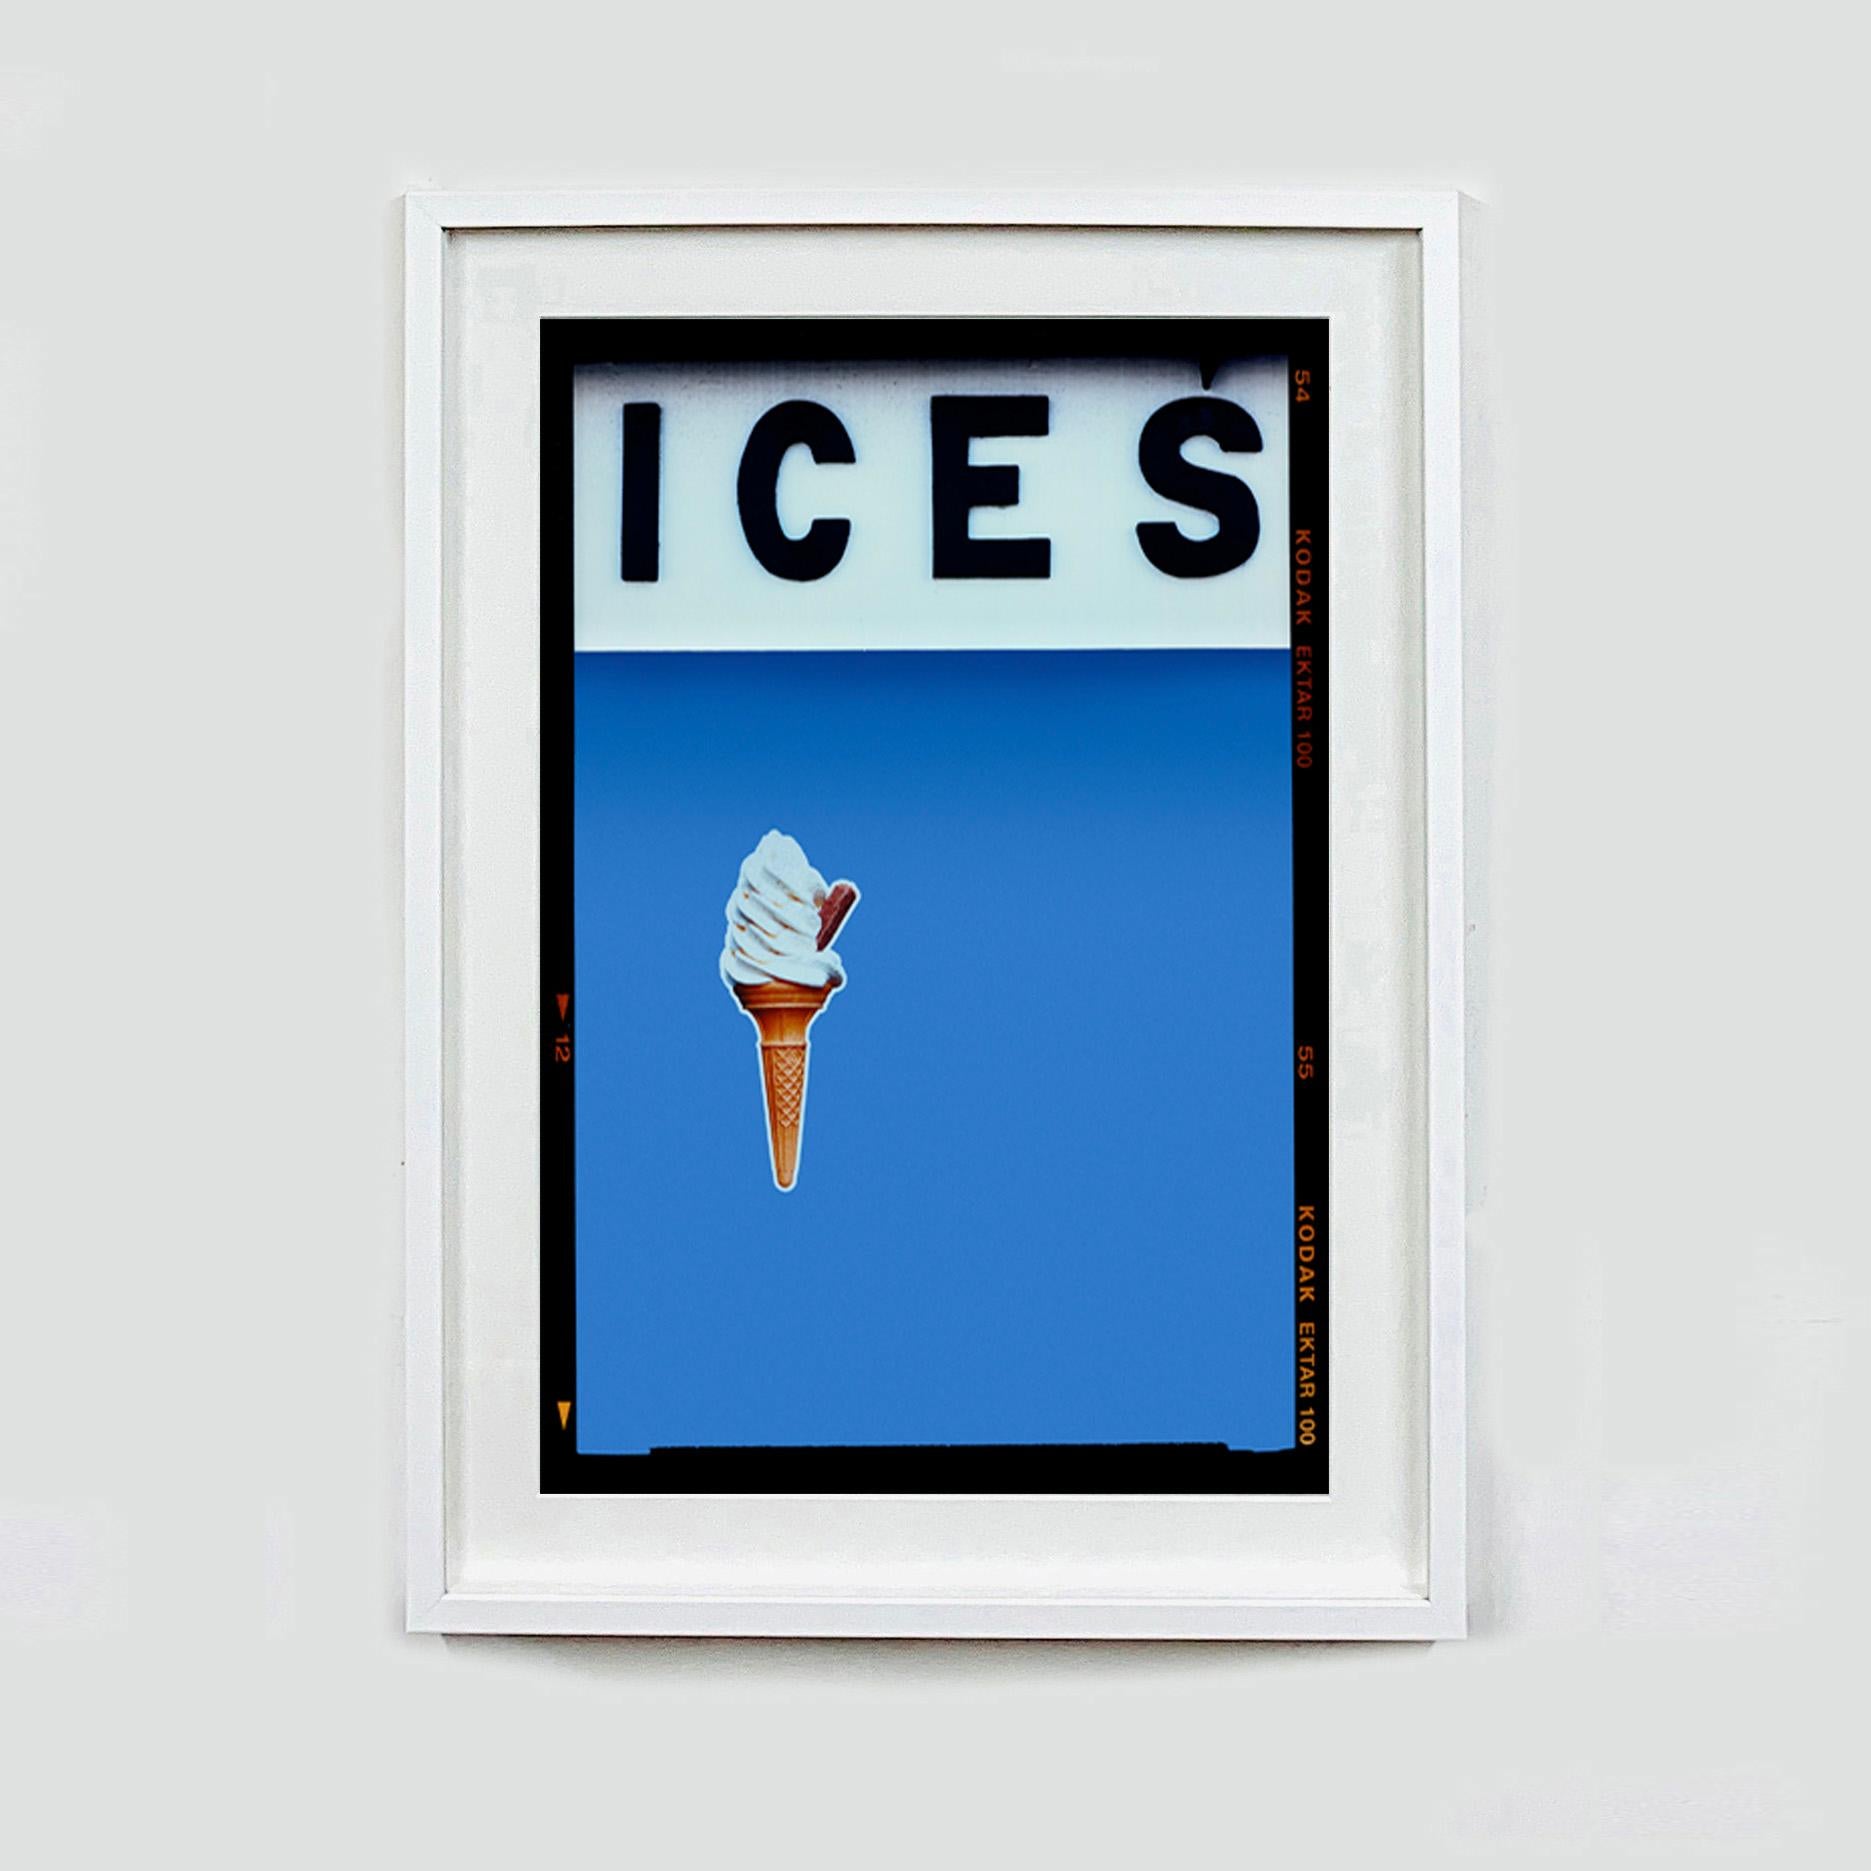 Ices (Baby Blue), Bexhill-on-Sea - British seaside color photography - Contemporary Print by Richard Heeps